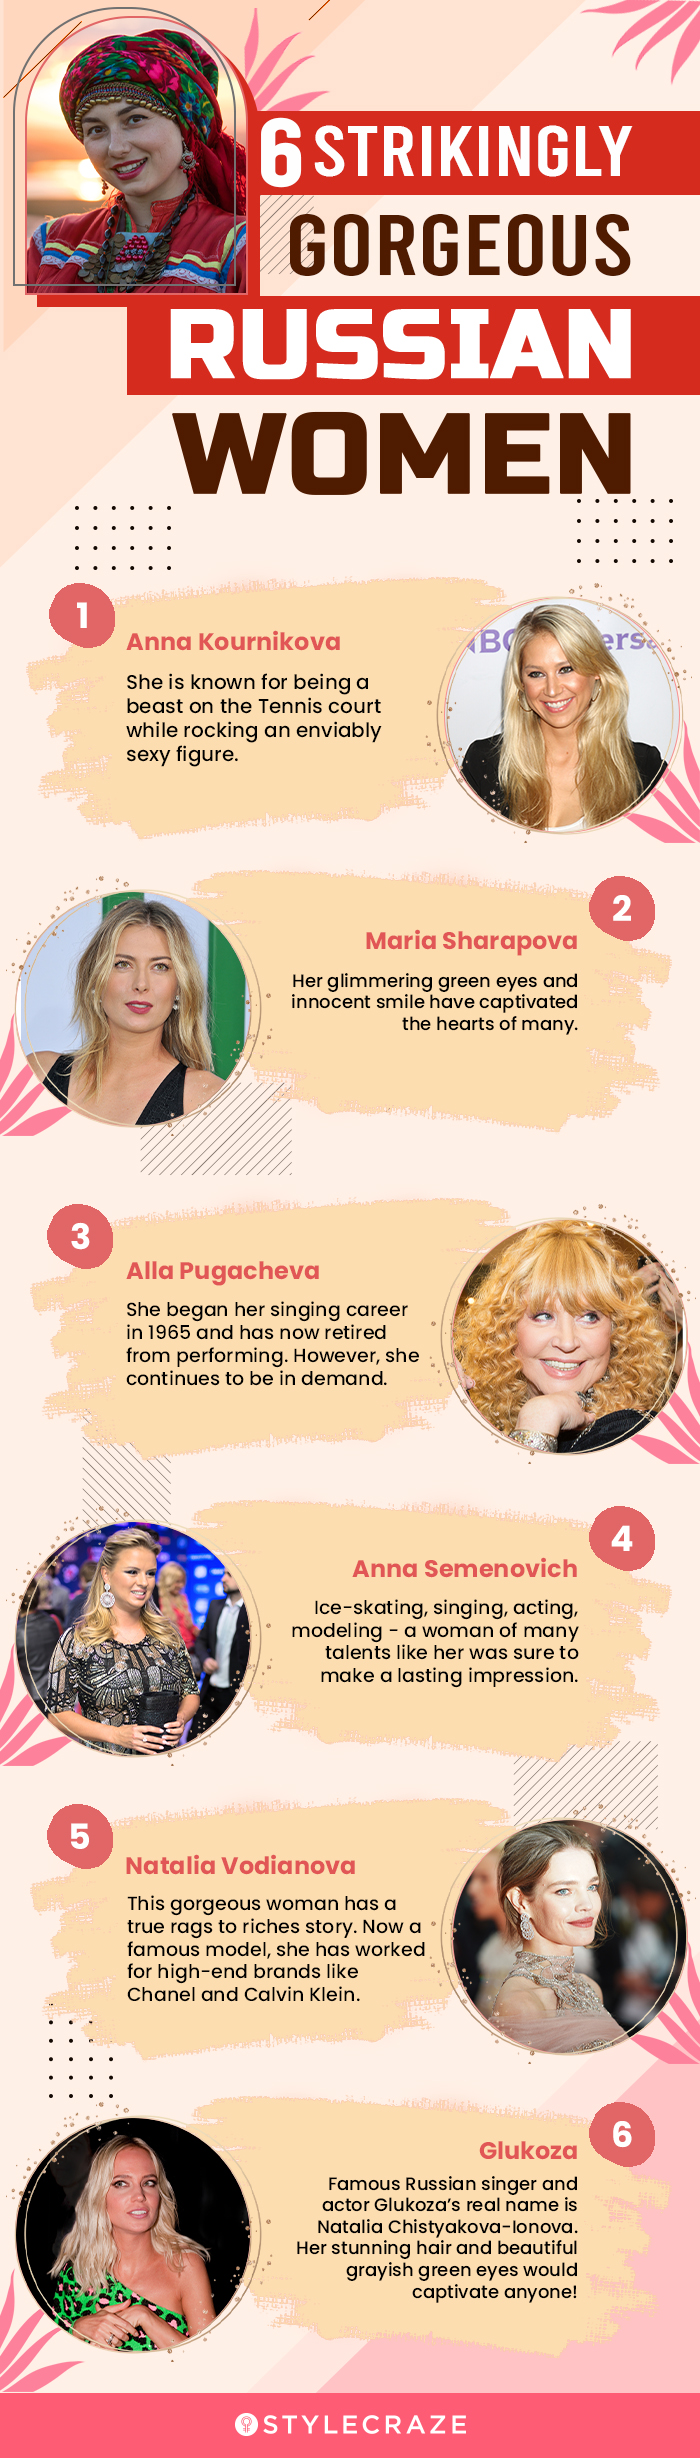 6 strikingly gorgeous russian women (infographic)